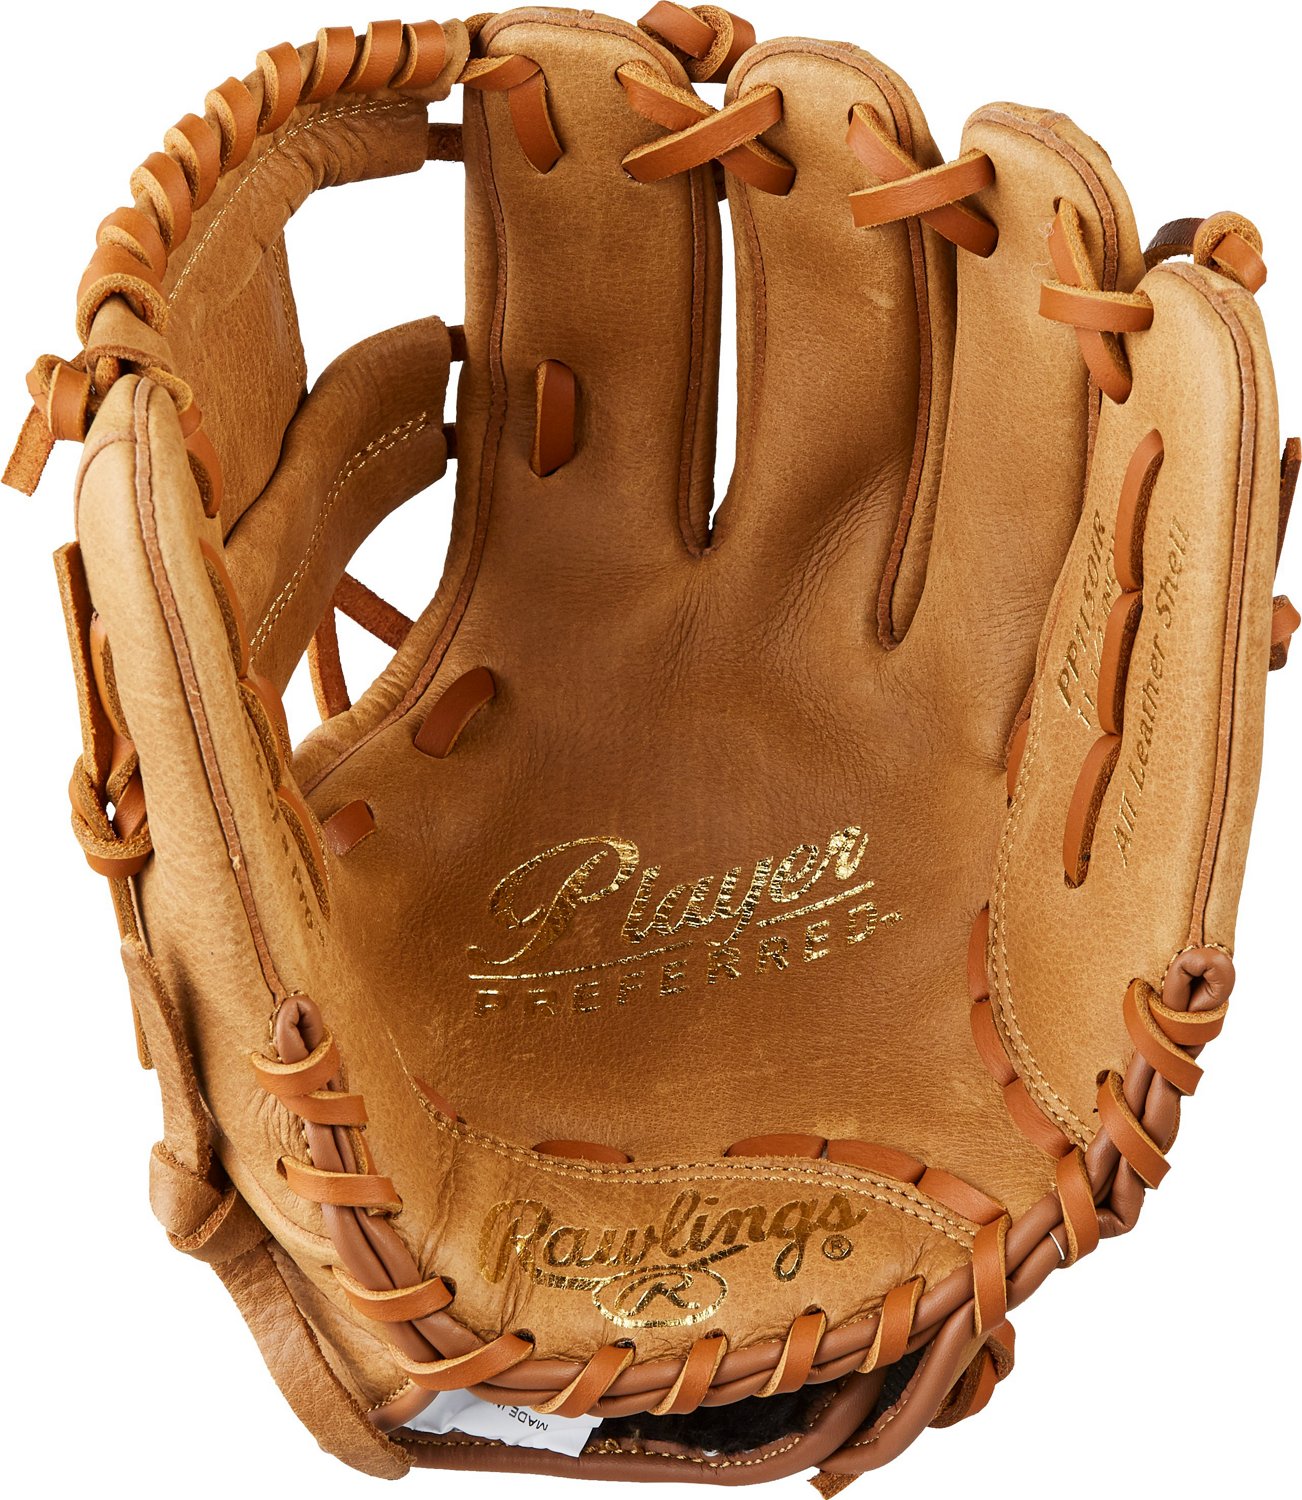 Rawlings Youth Player Preferred 11.5 in Baseball Infield Glove                                                                   - view number 3